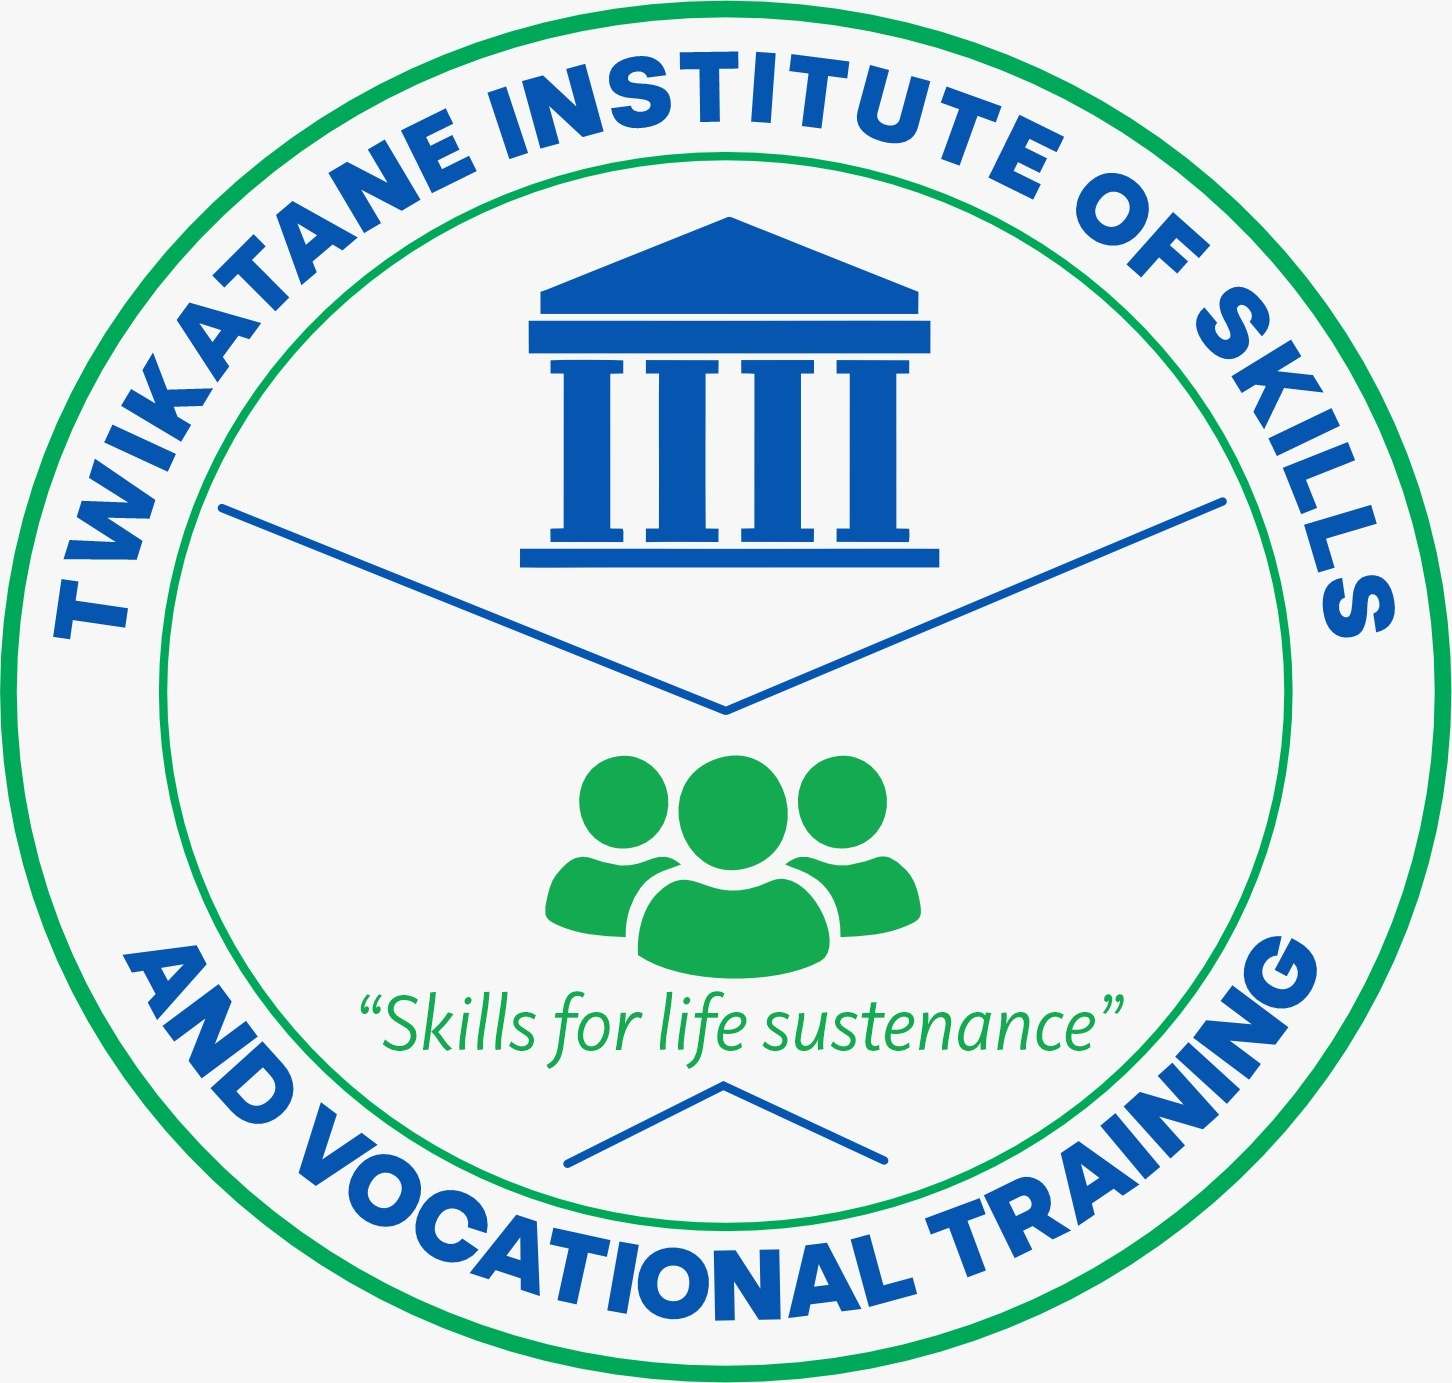 Welcome to Twikatane Institute for Vocational and Skills Training